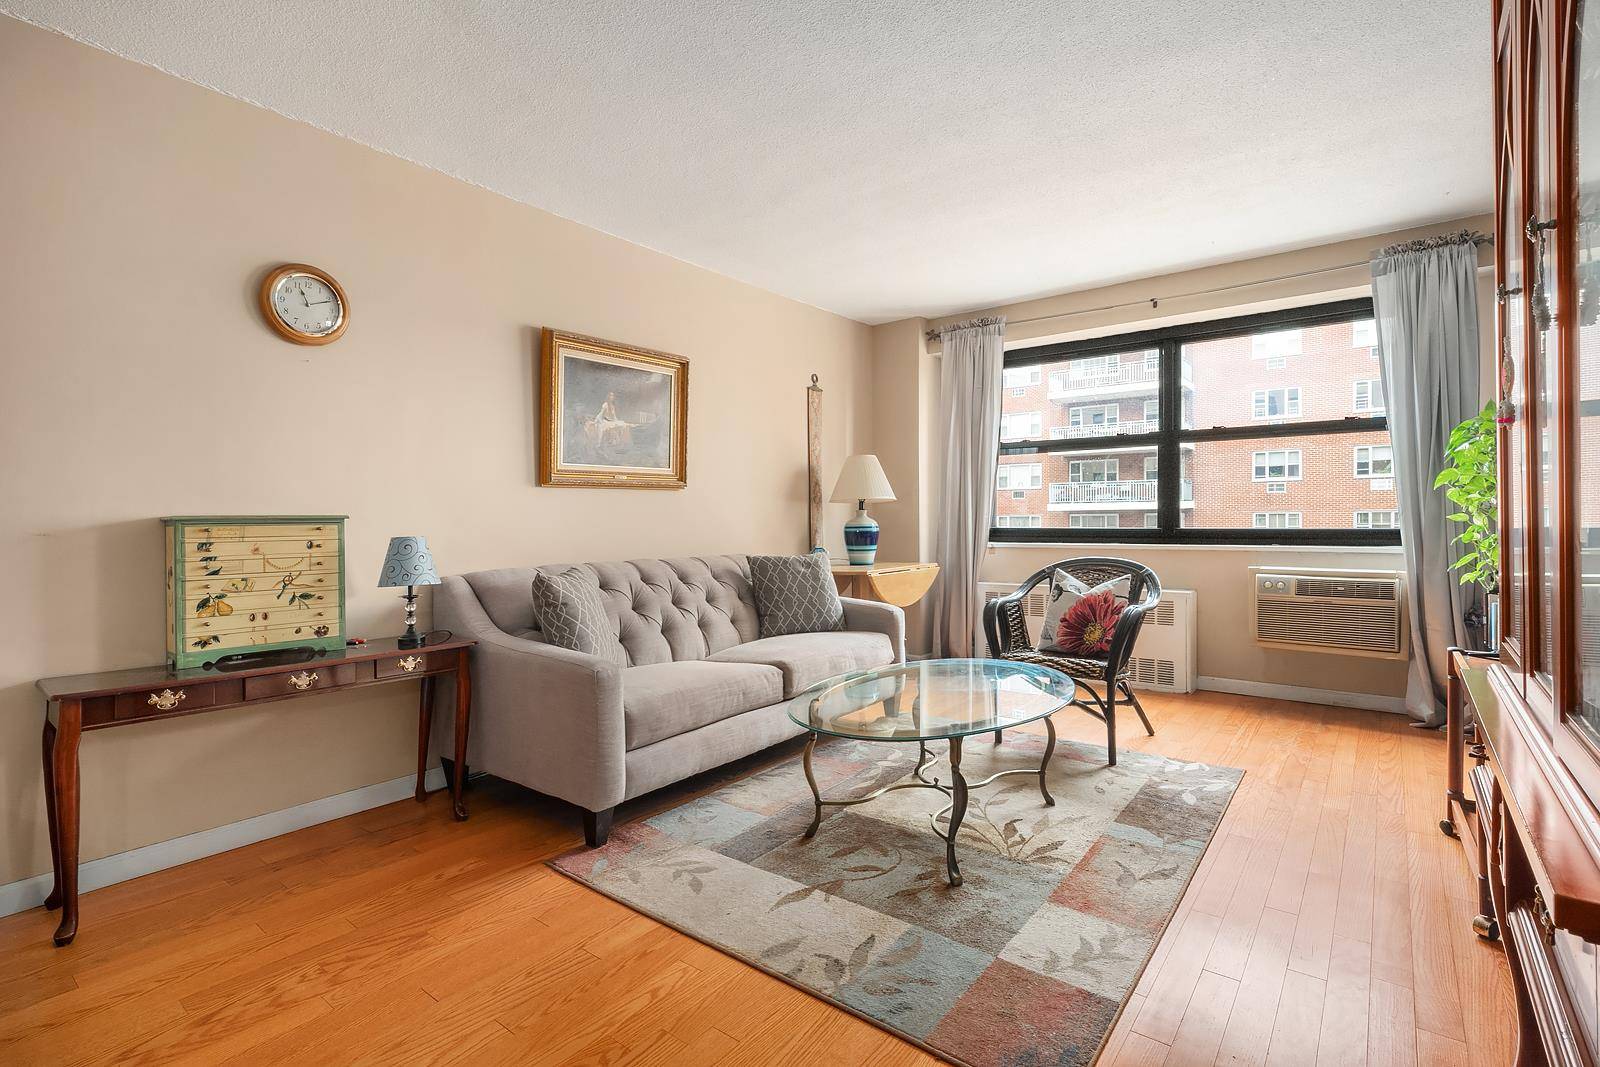 Brand new listing in the highly coveted and rarely available Parc Plaza Co Op in Woodside.